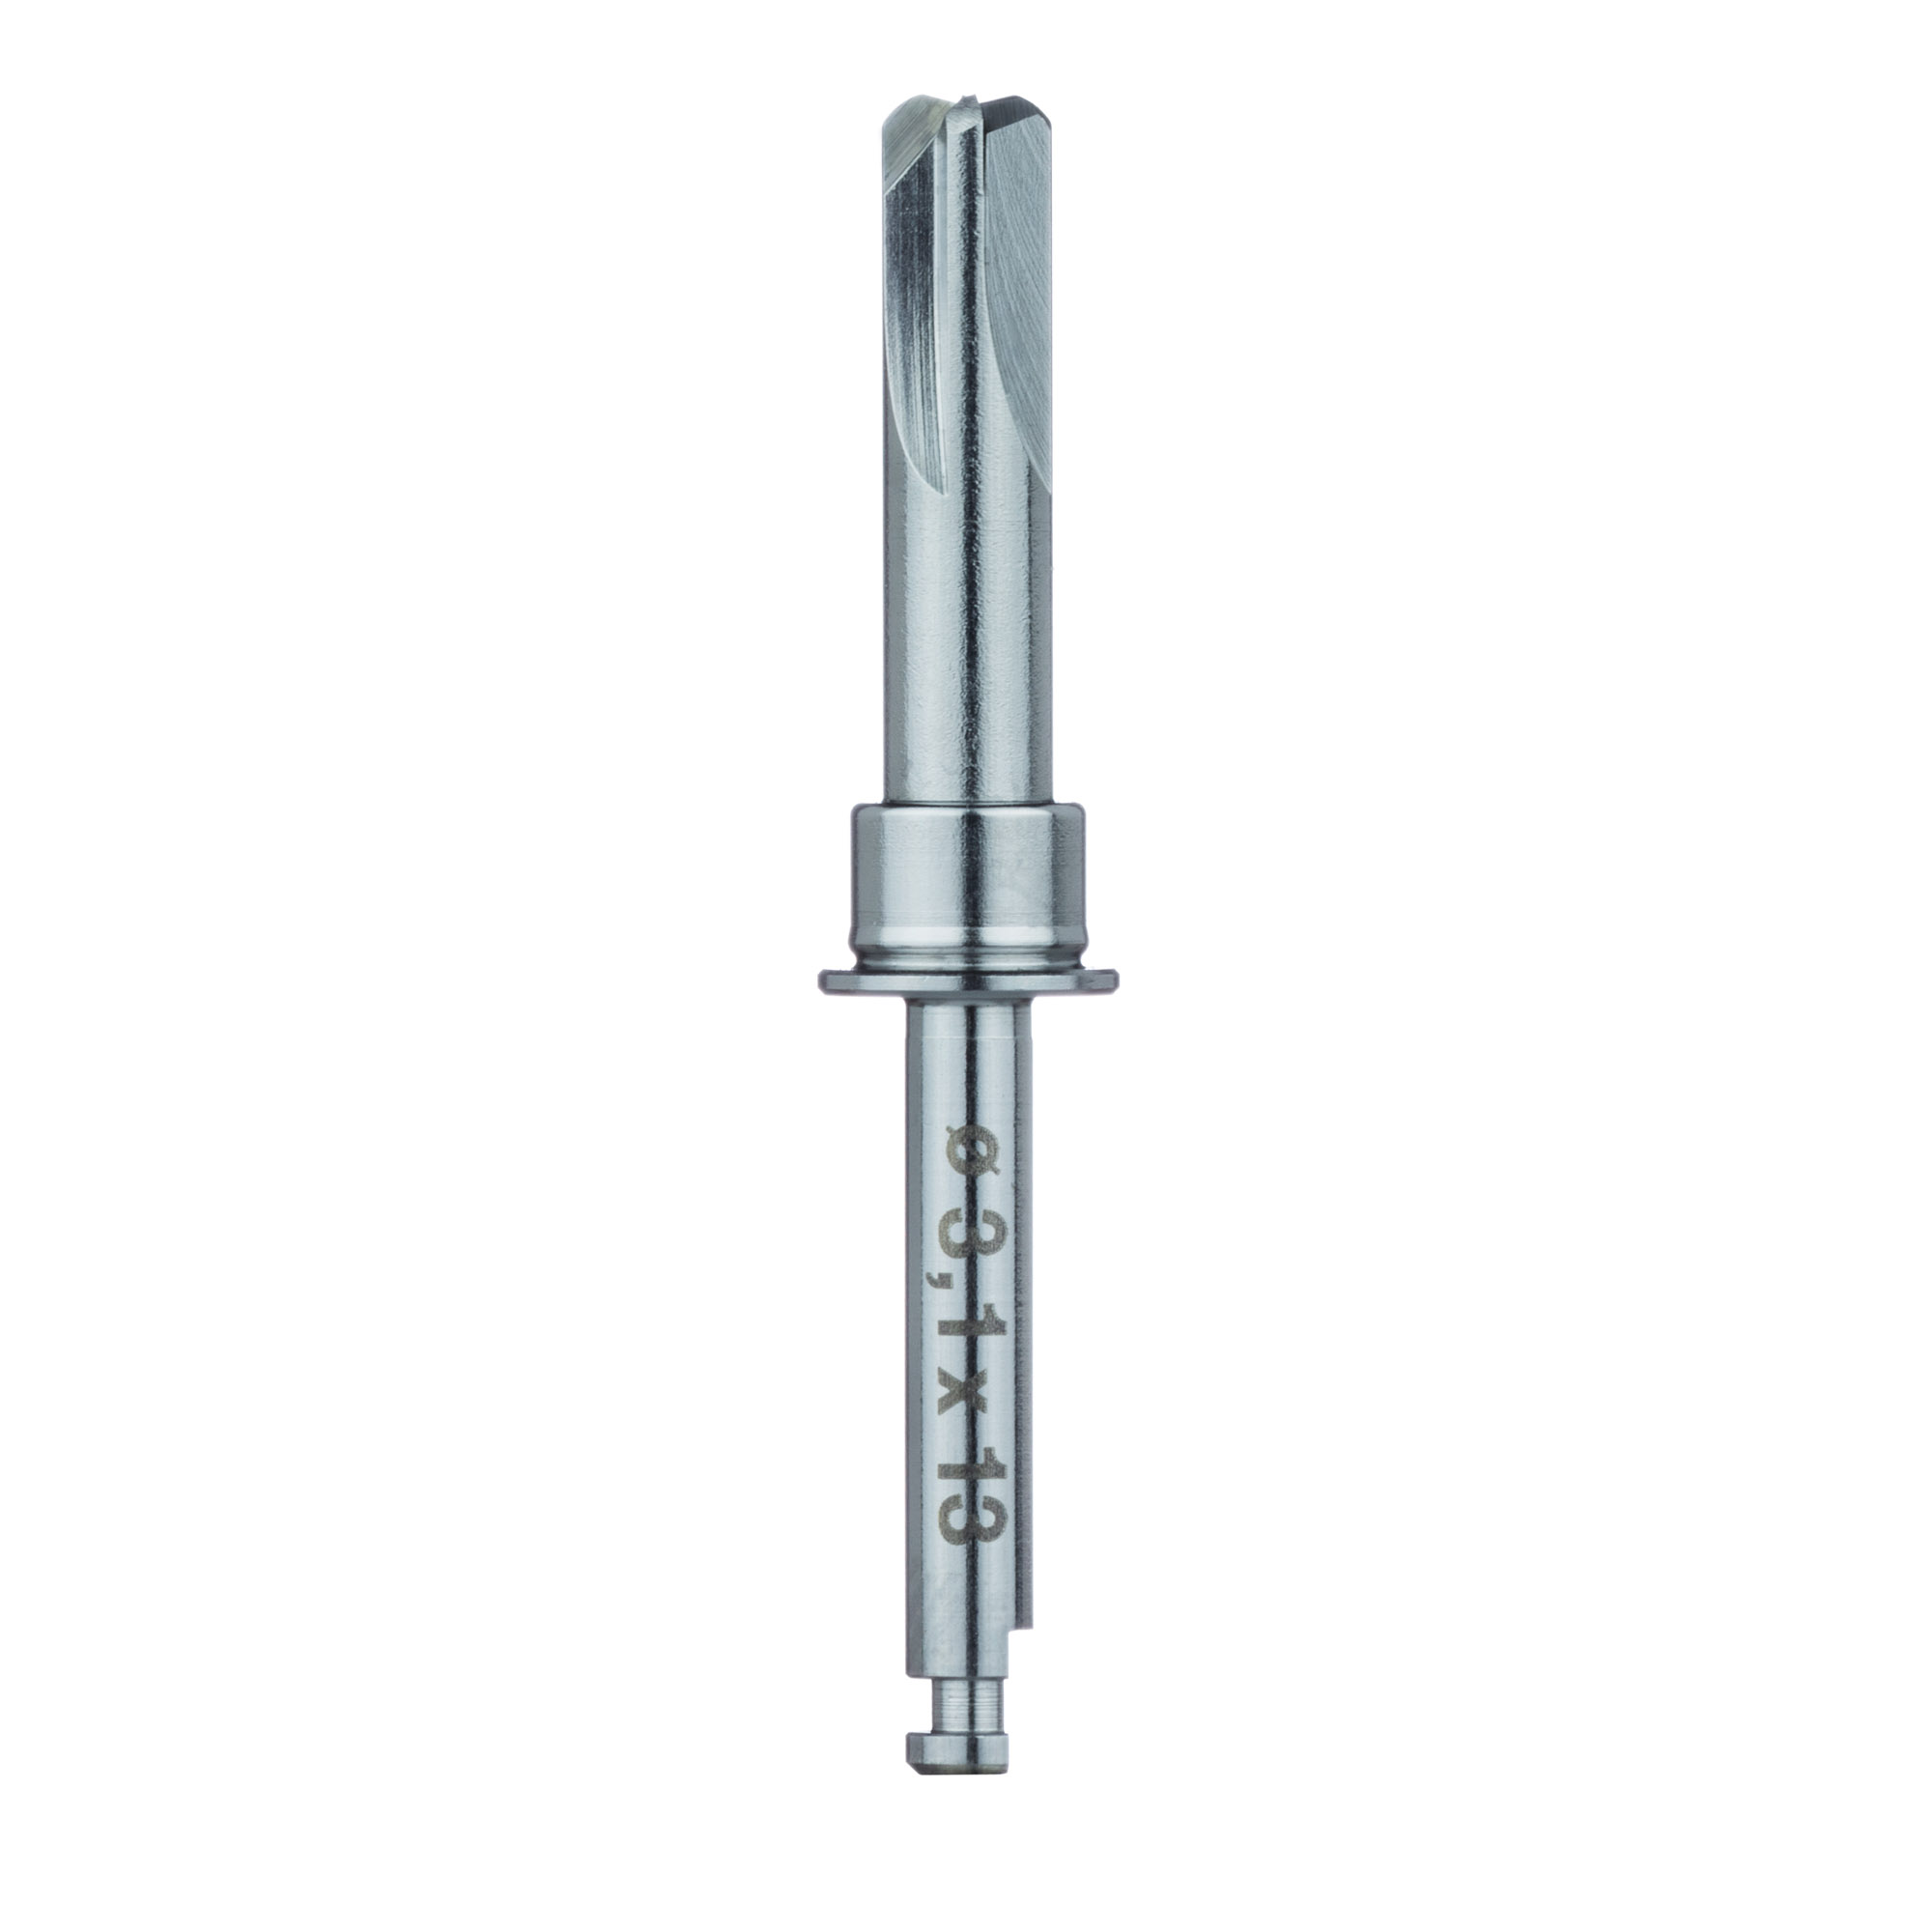 CL003 Surgery, Crestal Drill with Stop, 3.1mm Ø, RAXL